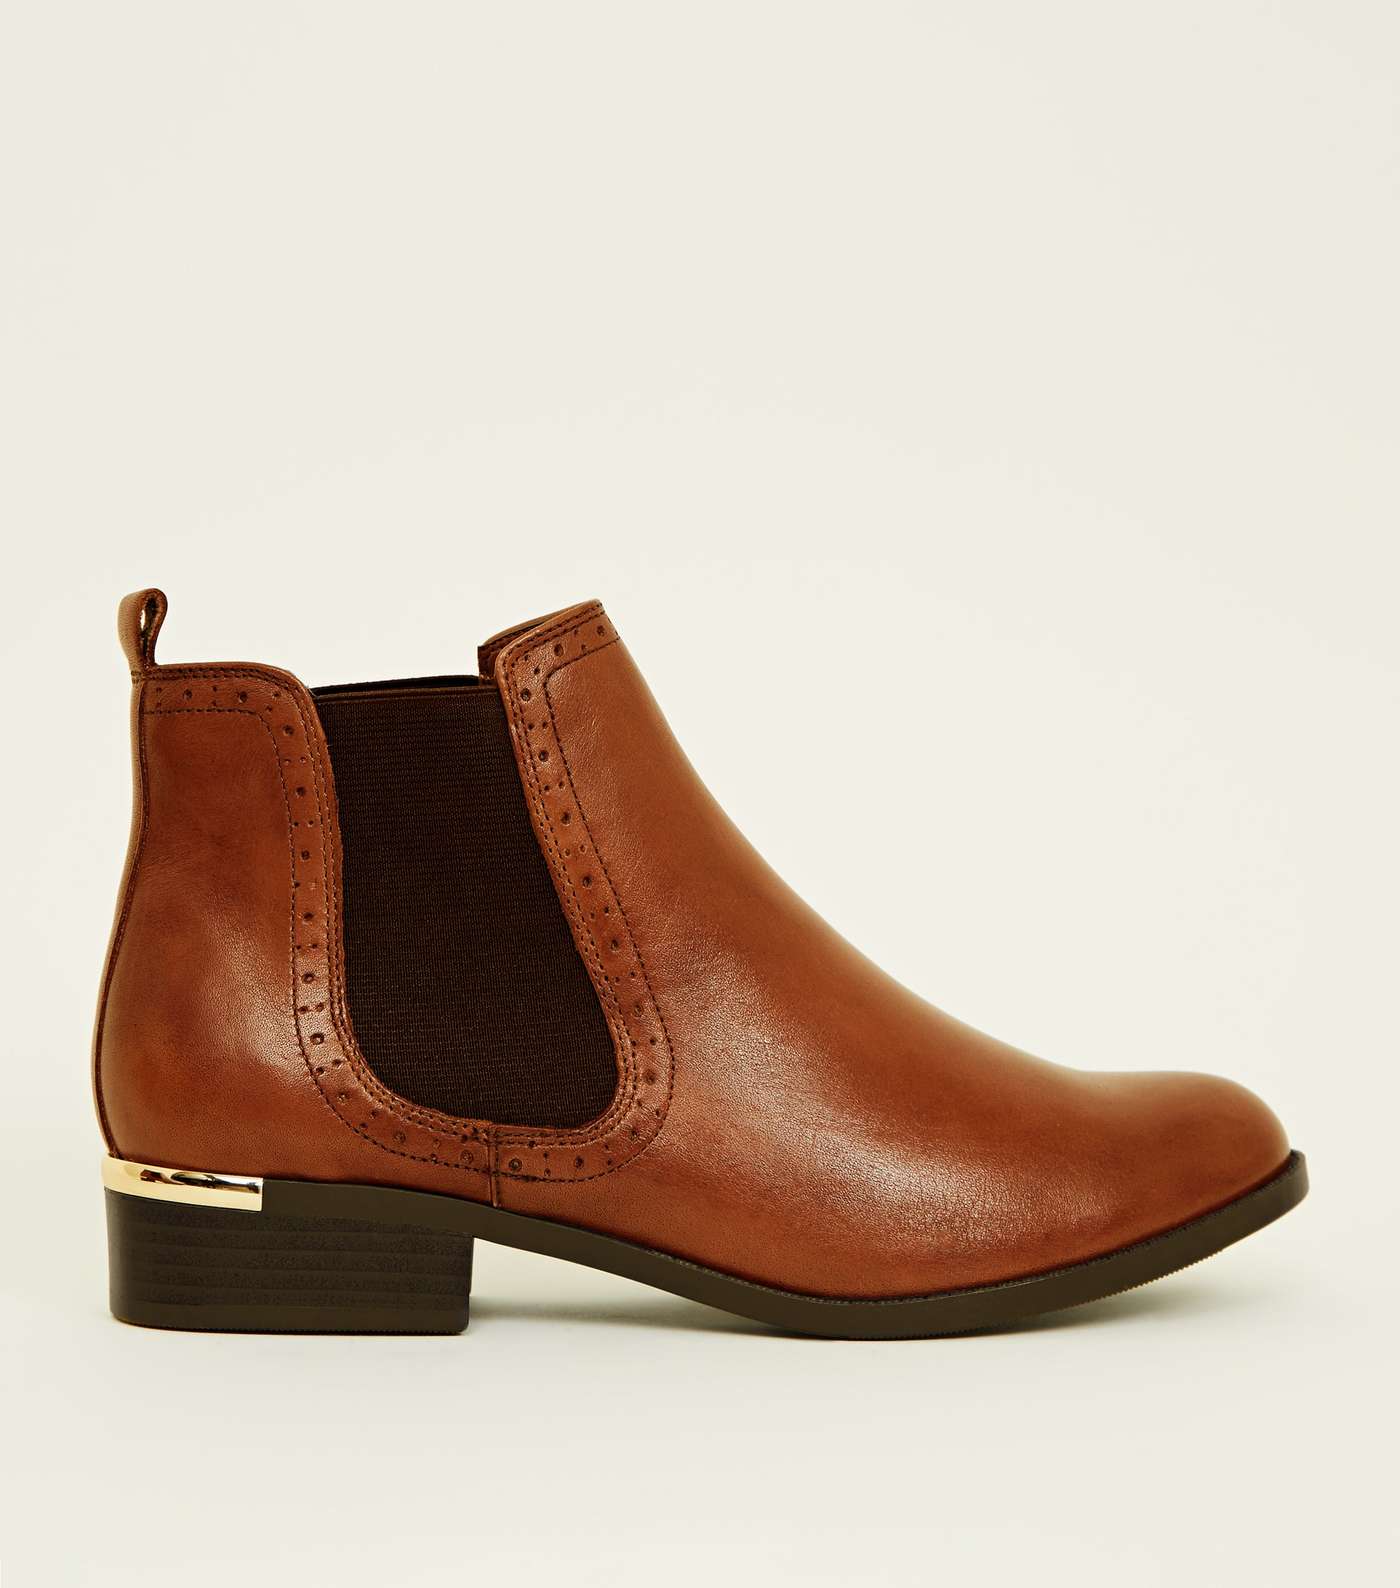 Tan Leather Metal Trim Brogue Chelsea Boots